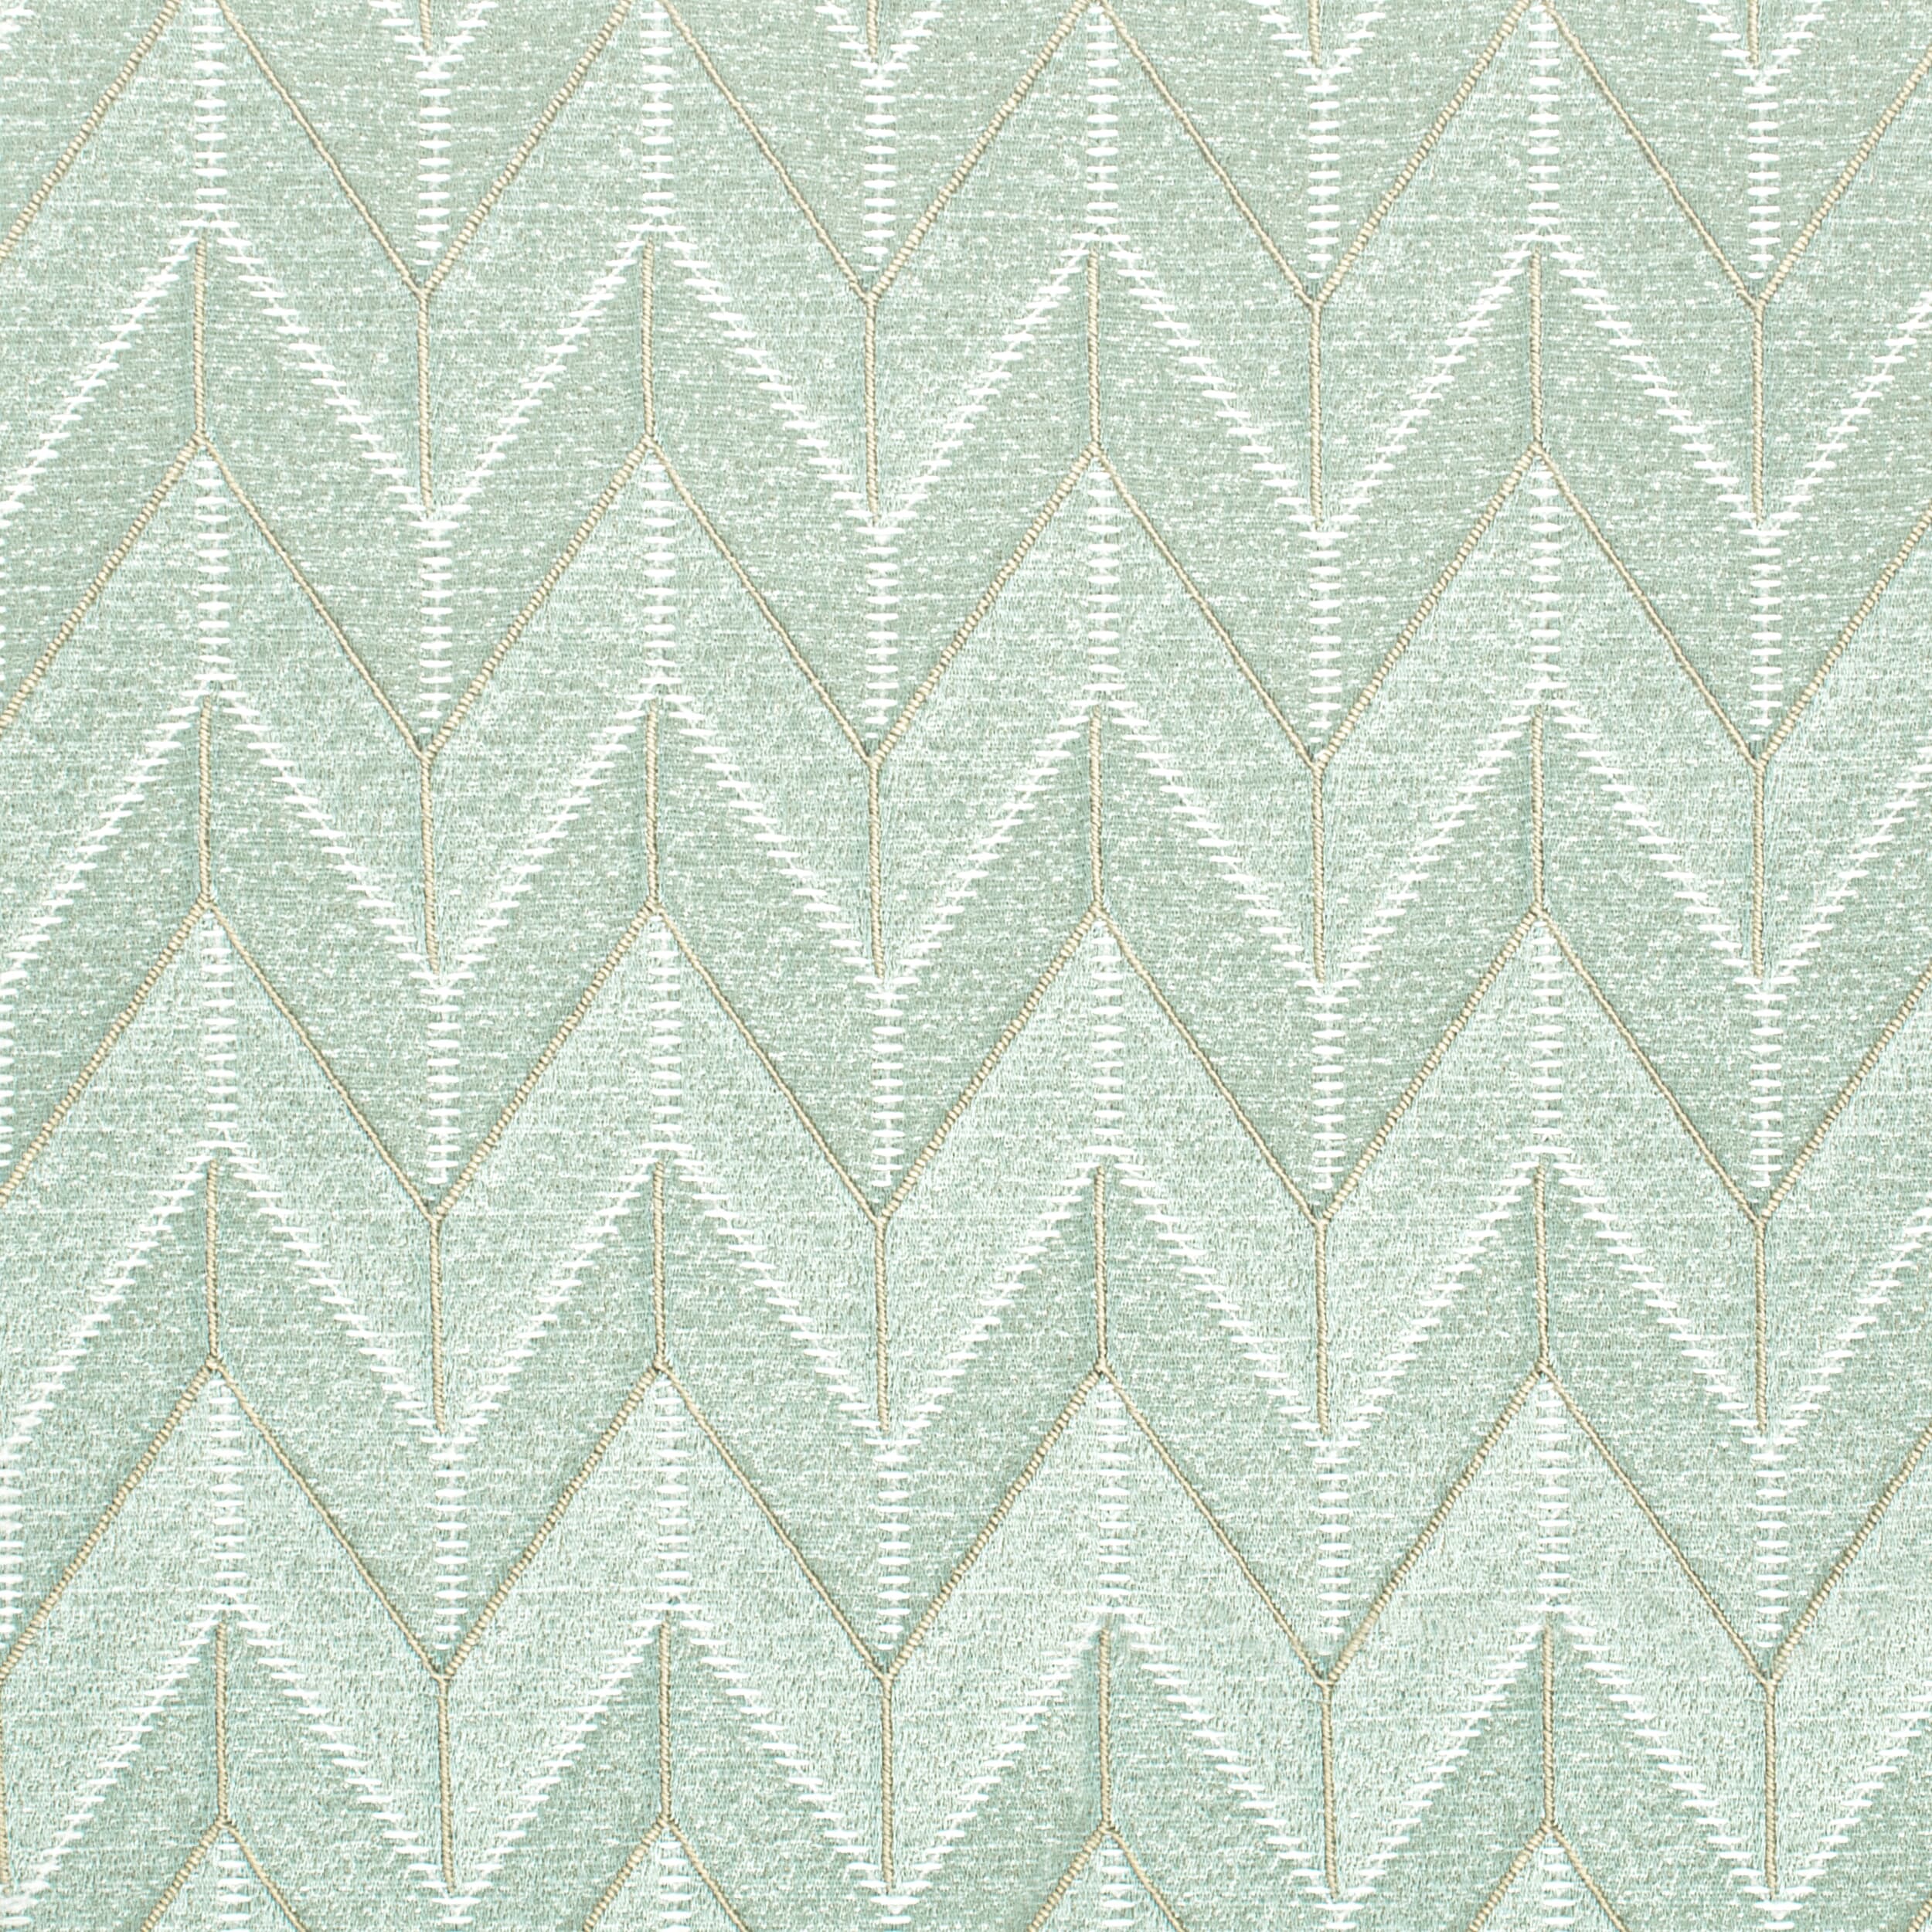 Brussels 3 Teal by Stout Fabric